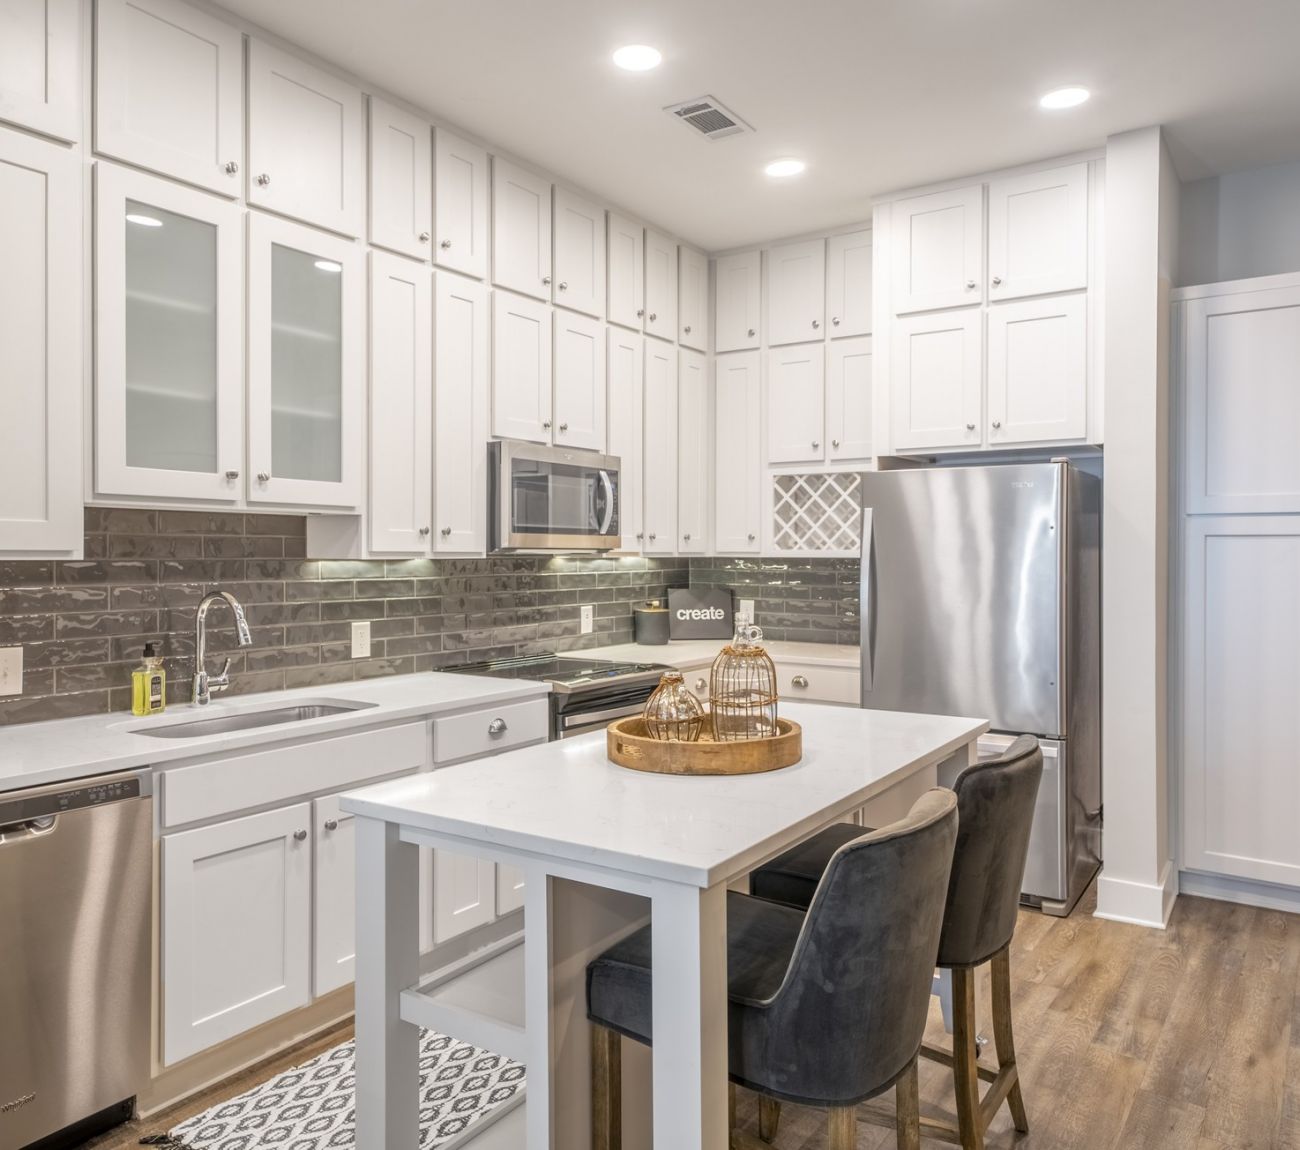 Kitchen with floor-to-ceiling designer cabinets, stainless steel appliances, and floating island at McEwen Northside Apartments